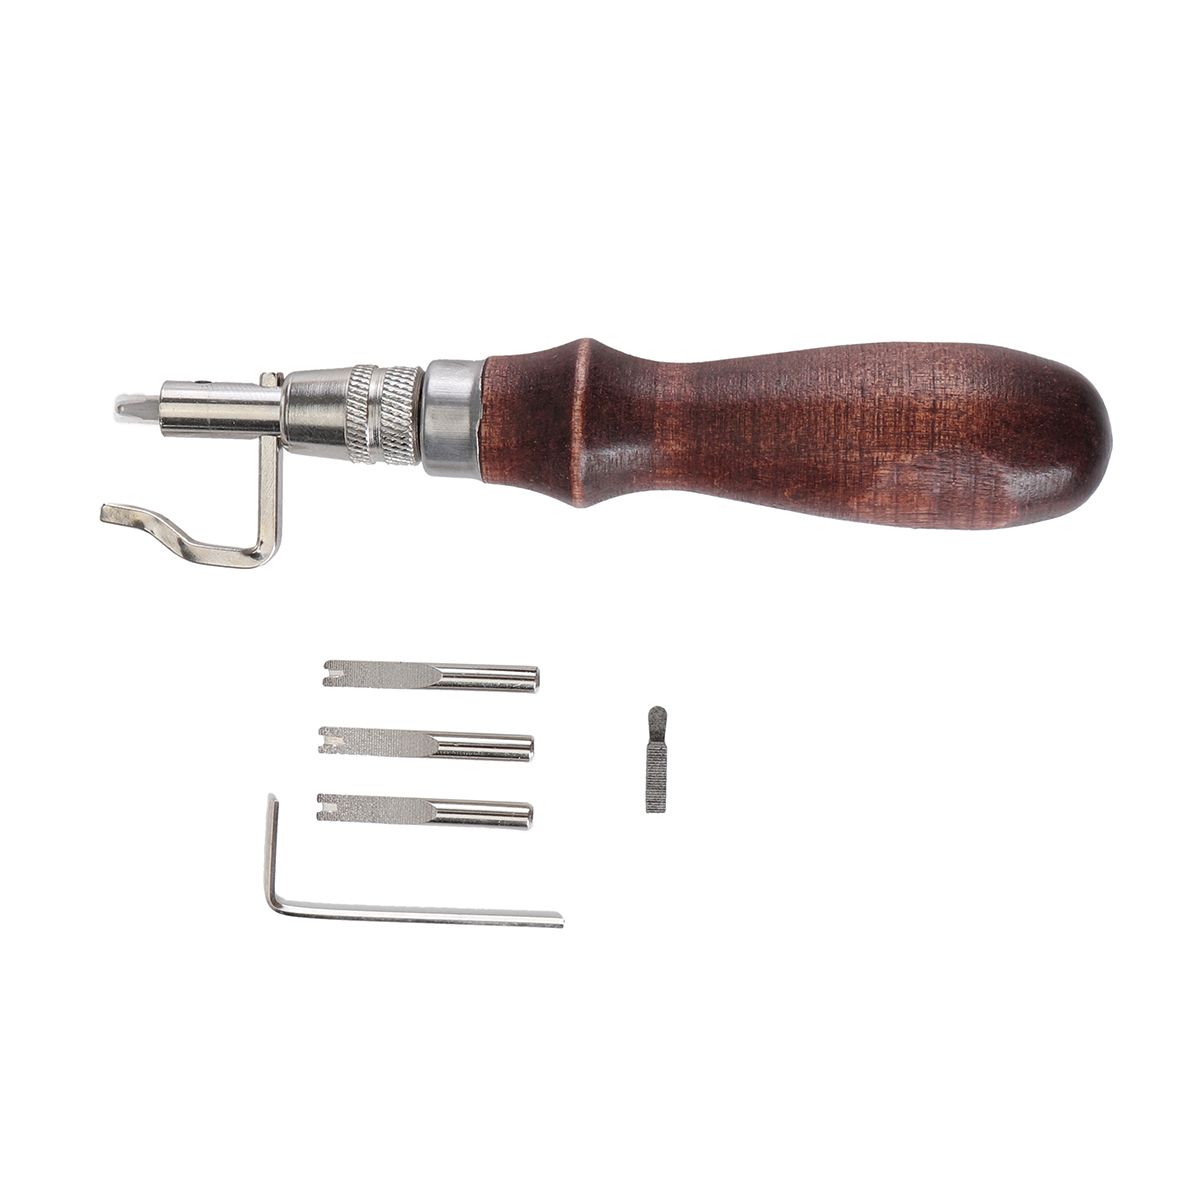 50PCS-Leather-Craft-Tools-Kit-Hand-DIY-Sewing-Stitching-Carving-Work-Punch-Saddle-for-Leather-Workin-1595138